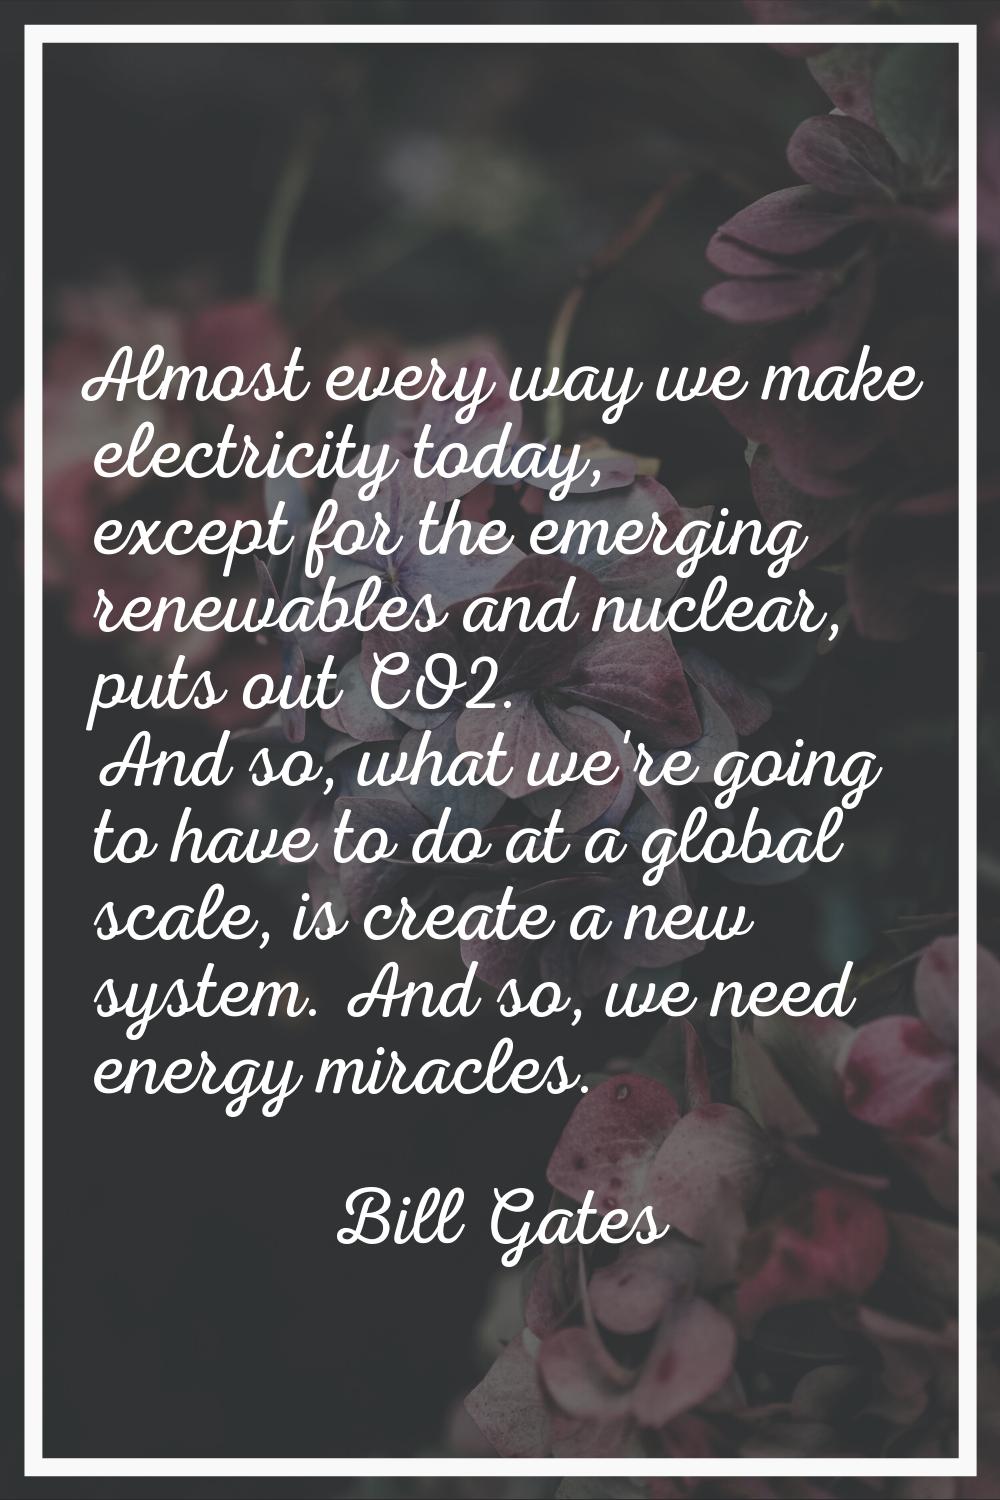 Almost every way we make electricity today, except for the emerging renewables and nuclear, puts ou